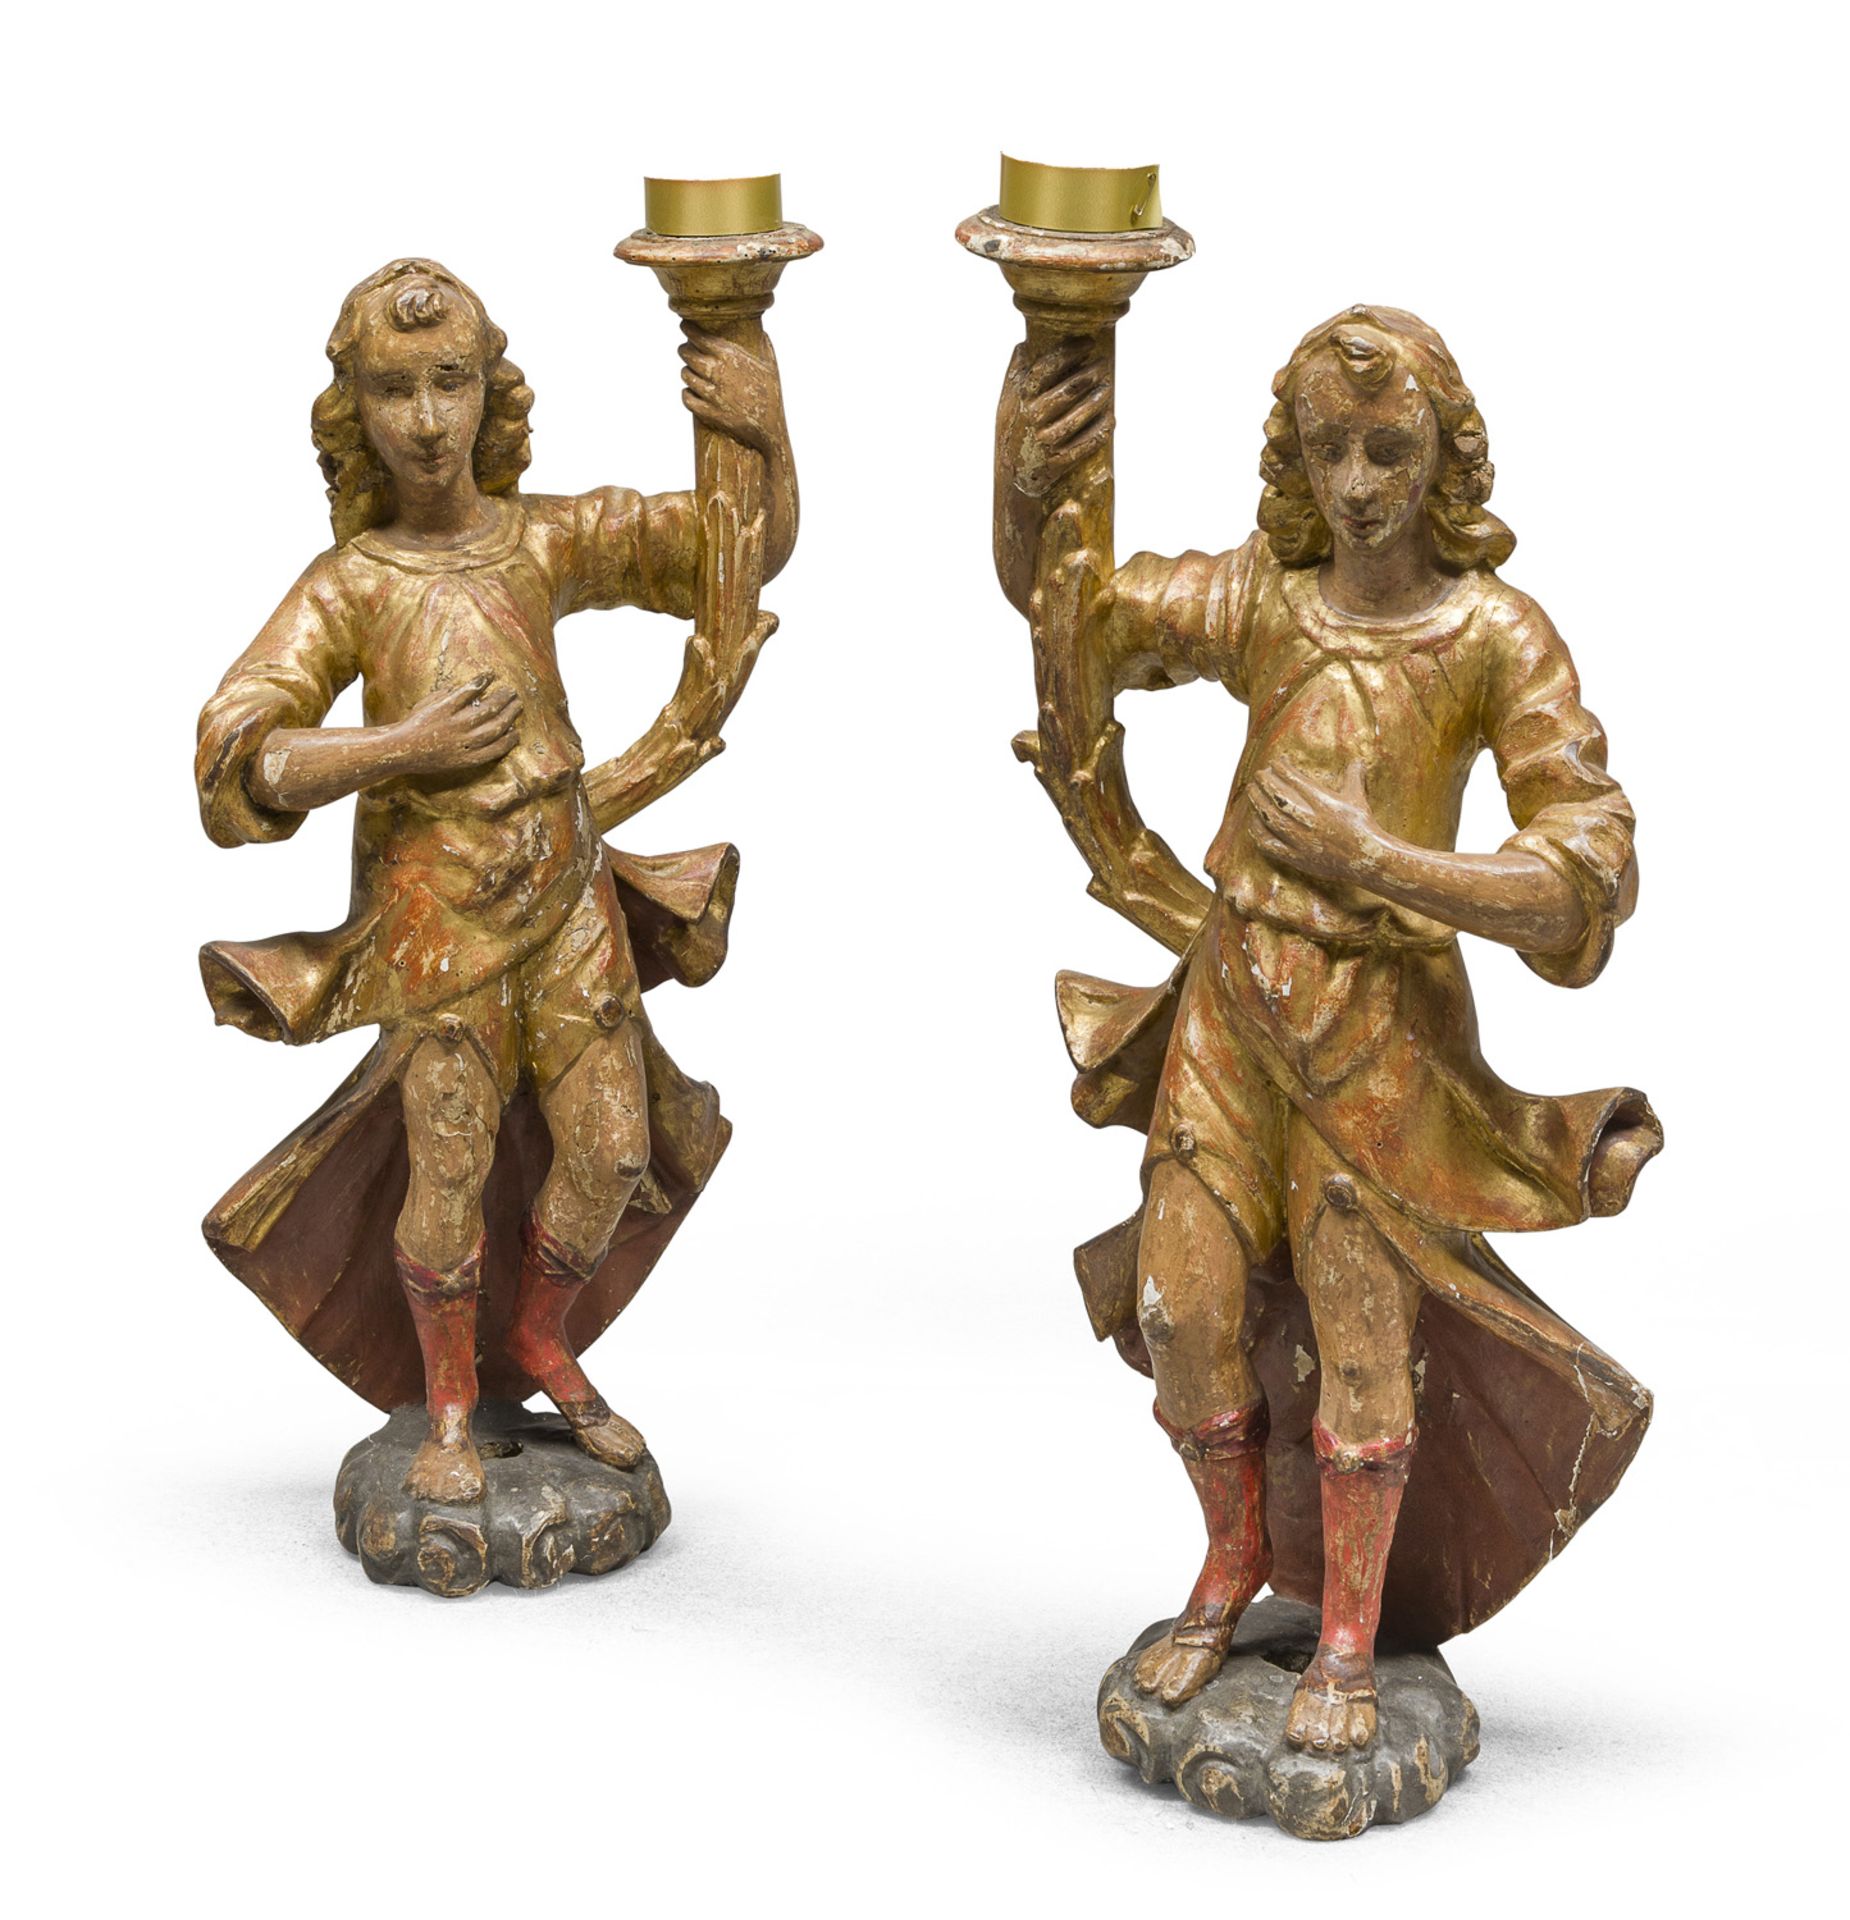 PAIR OF WOODEN CANDLESTICK SCULPTURES VENICE EARLY 18th CENTURY